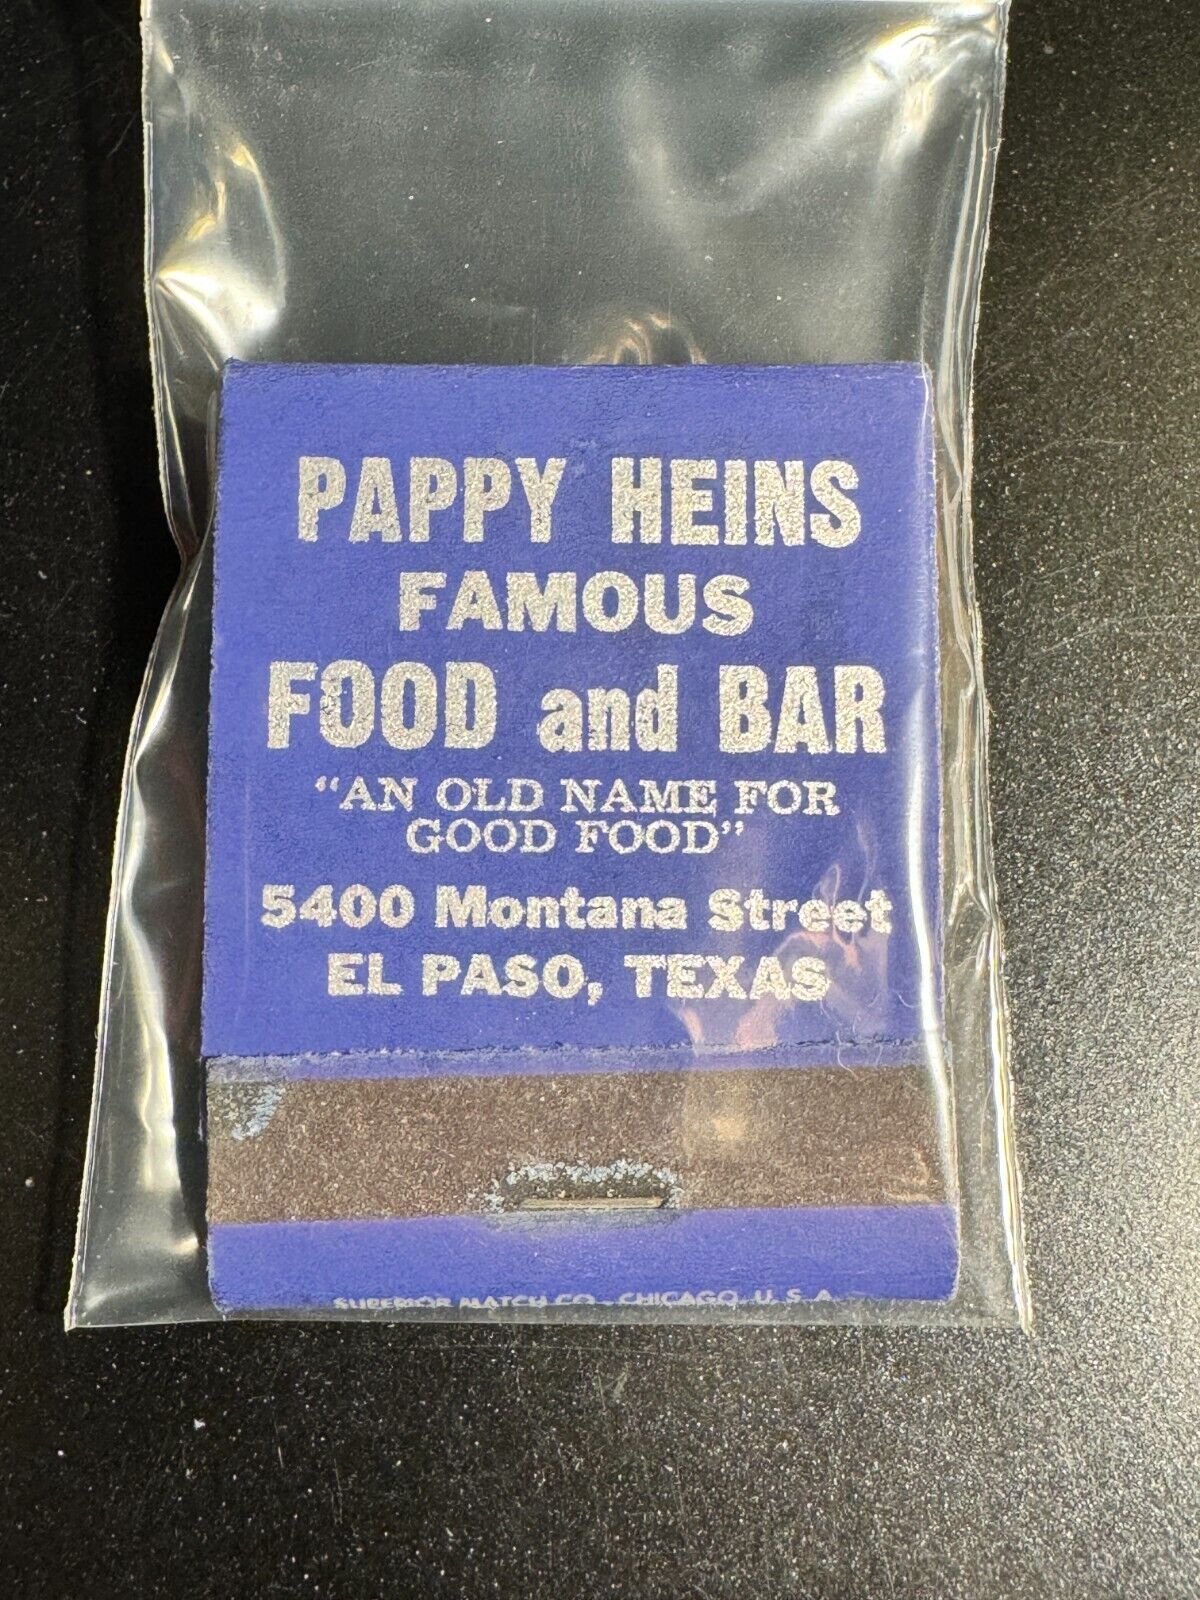 MATCHBOOK - PAPPY HEINS FAMOUS FOOD AND BAR - EL PASO, TX - UNSTRUCK